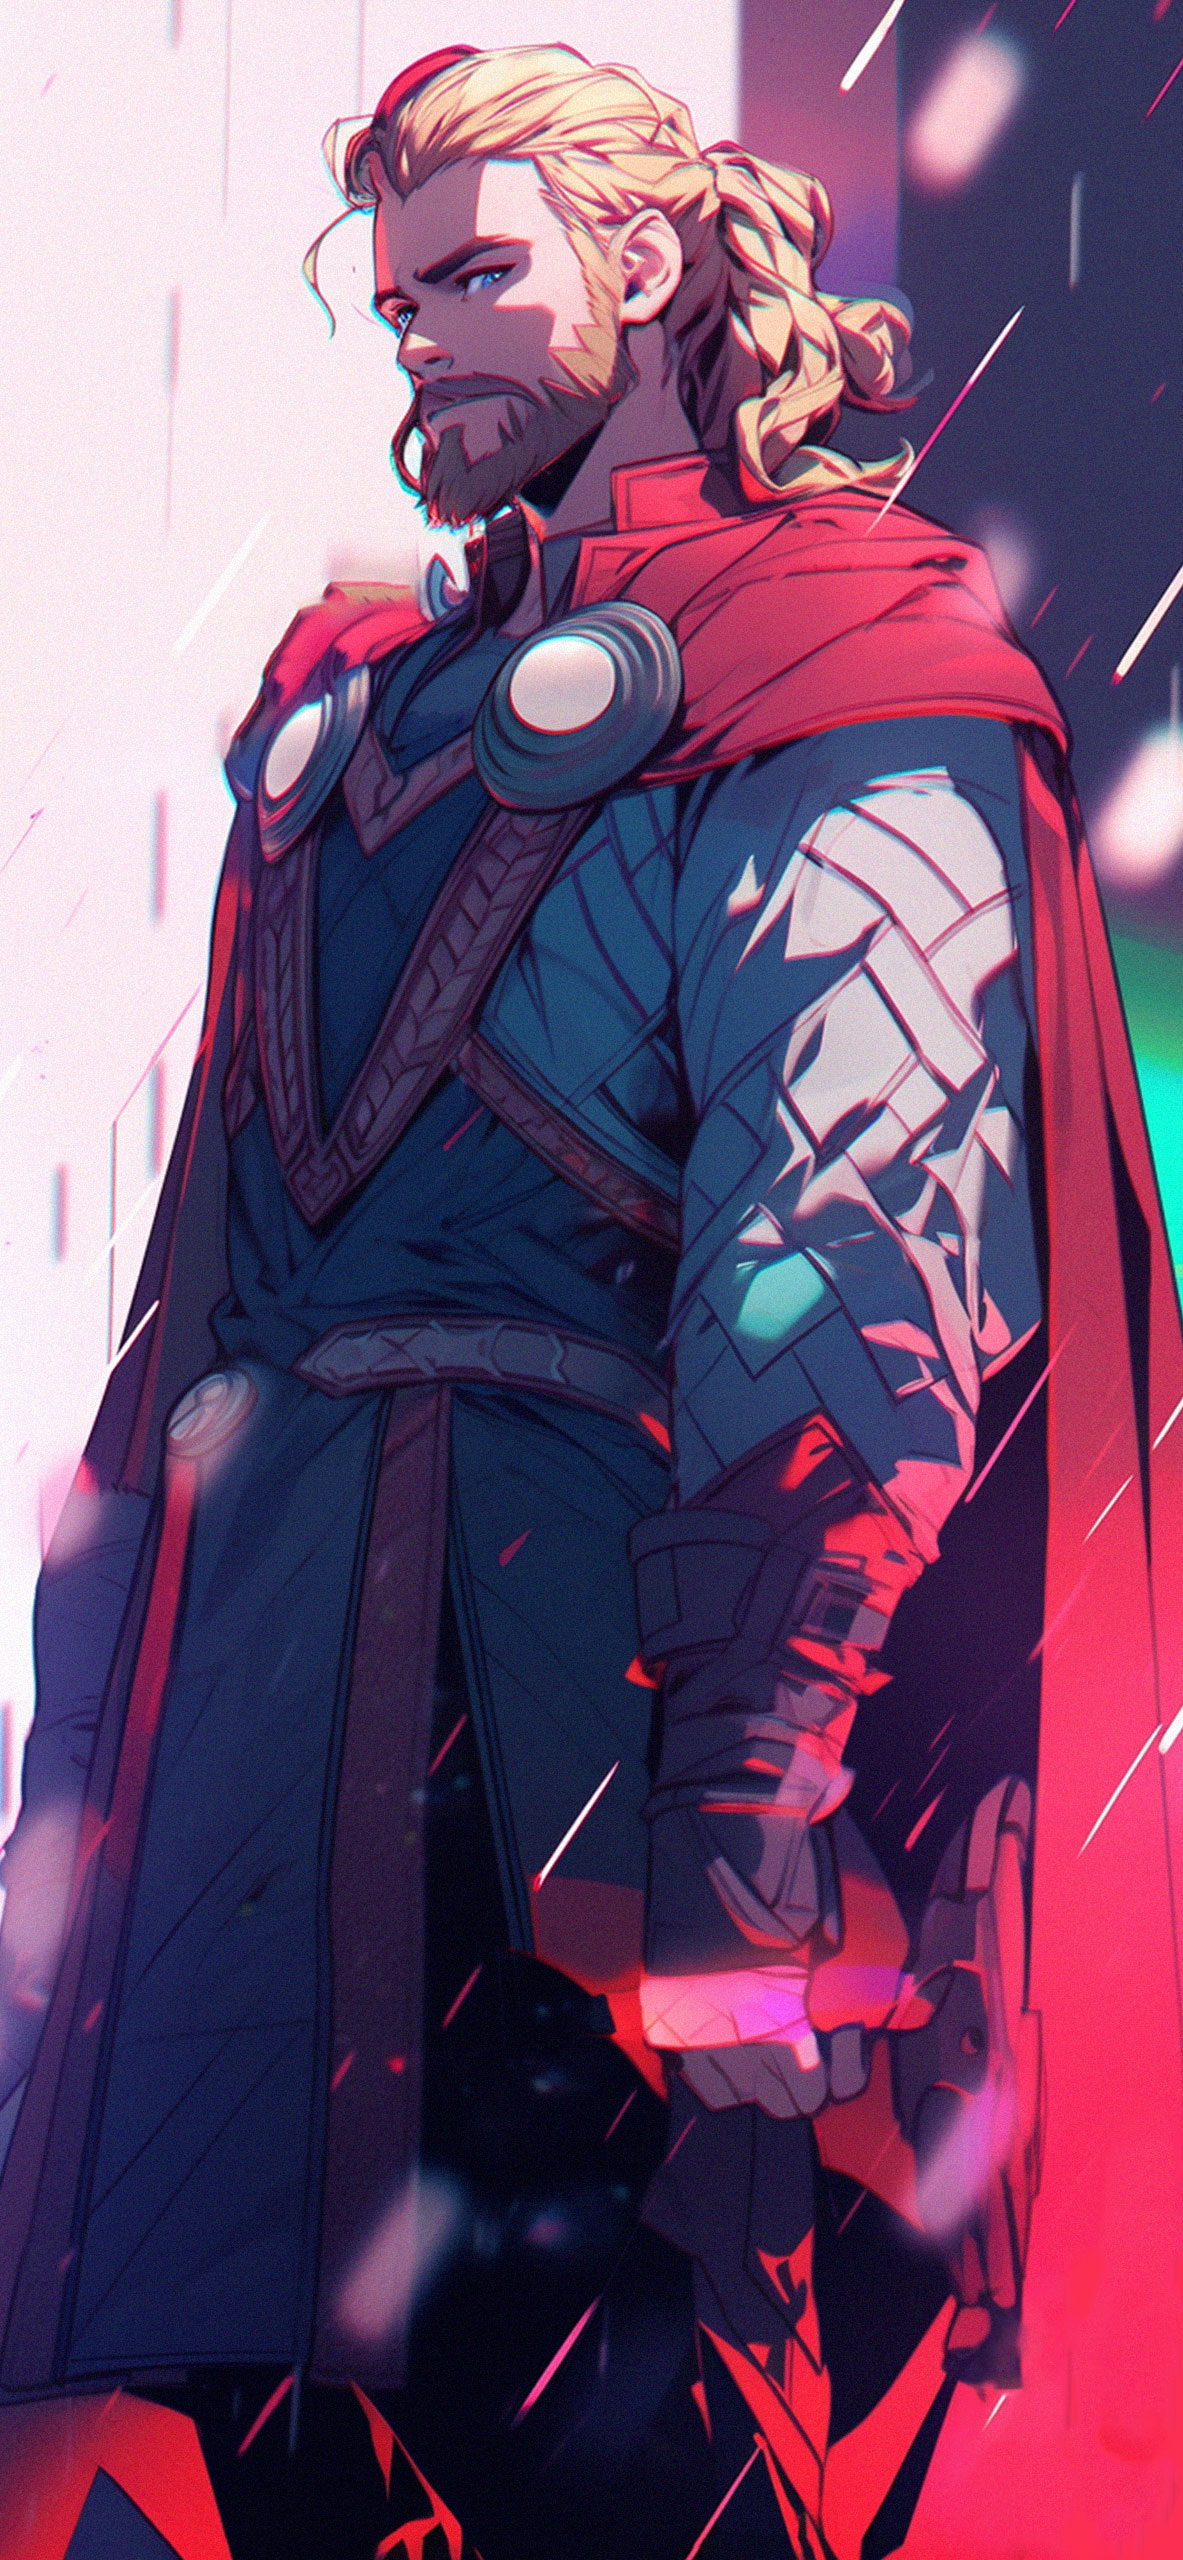 Thor as an anime character by MaxGreen88 on Newgrounds